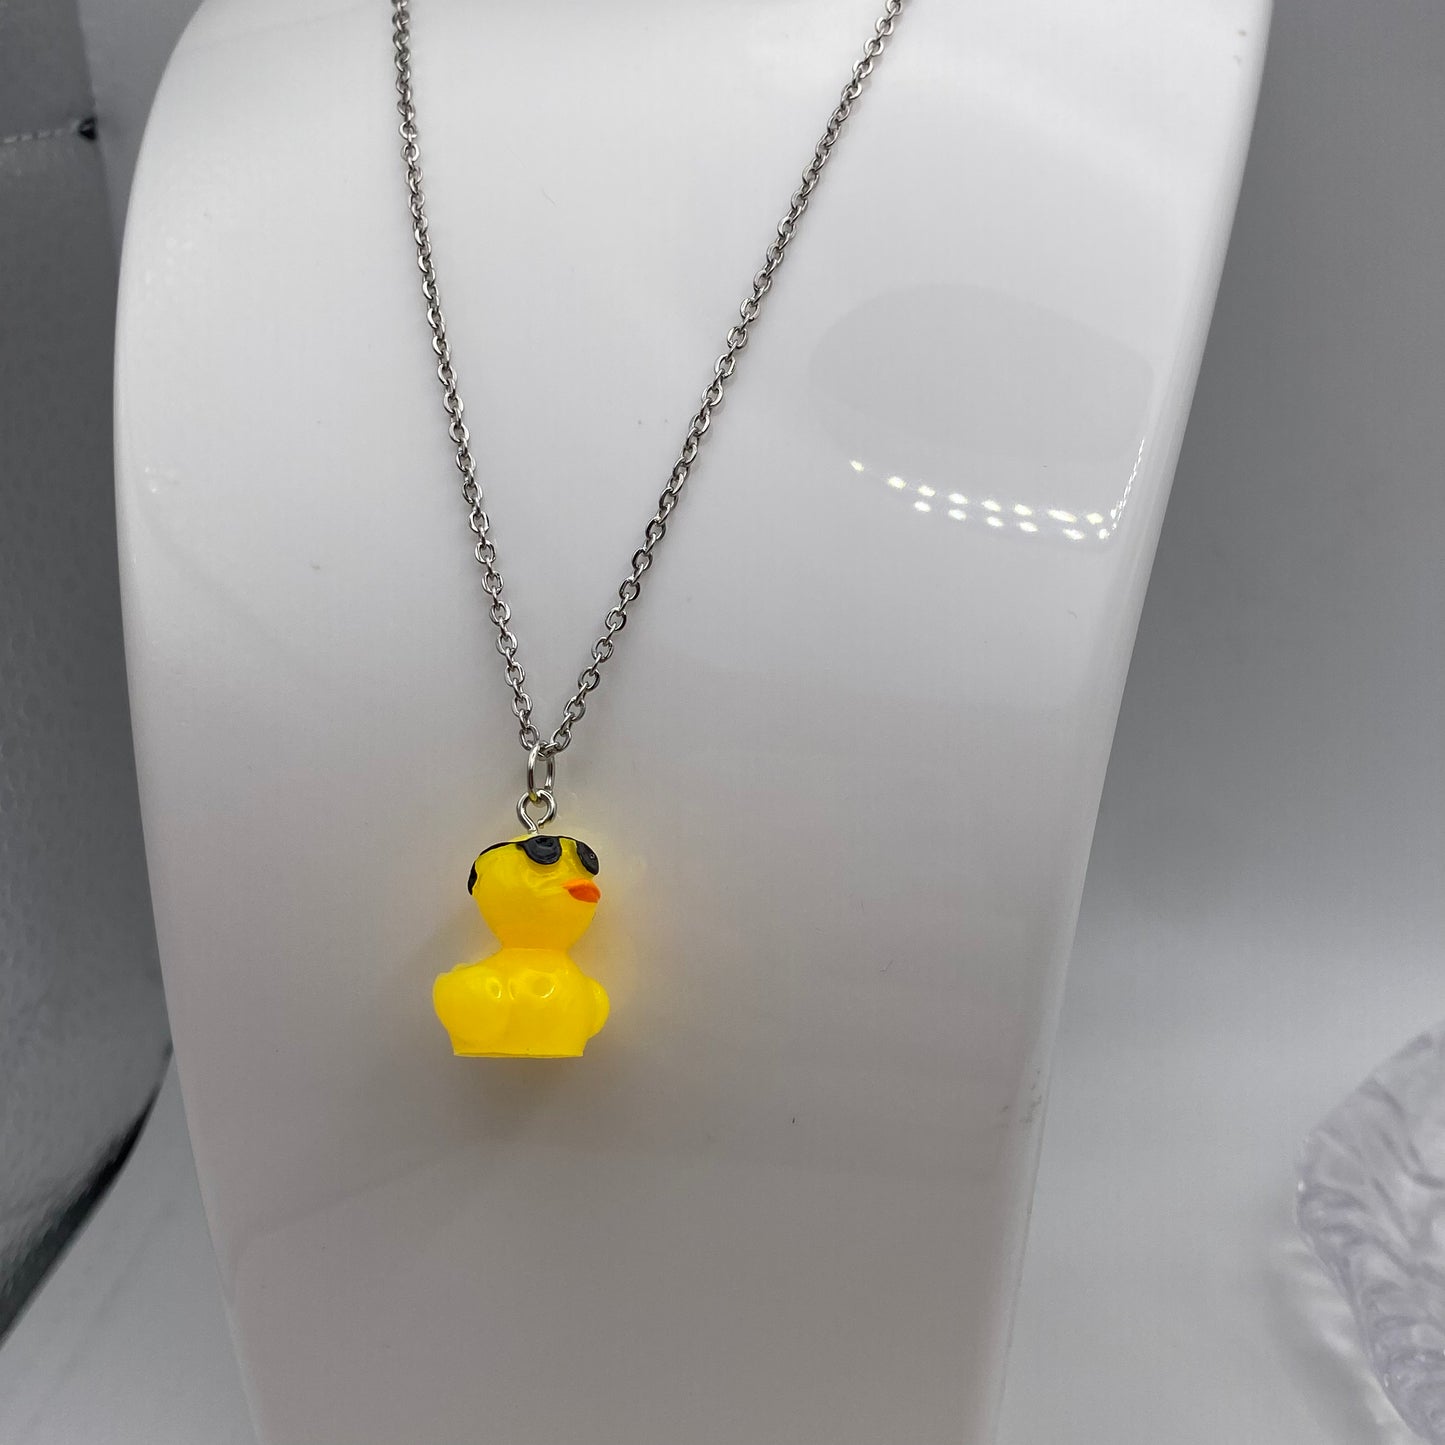 Cool Duck Necklace